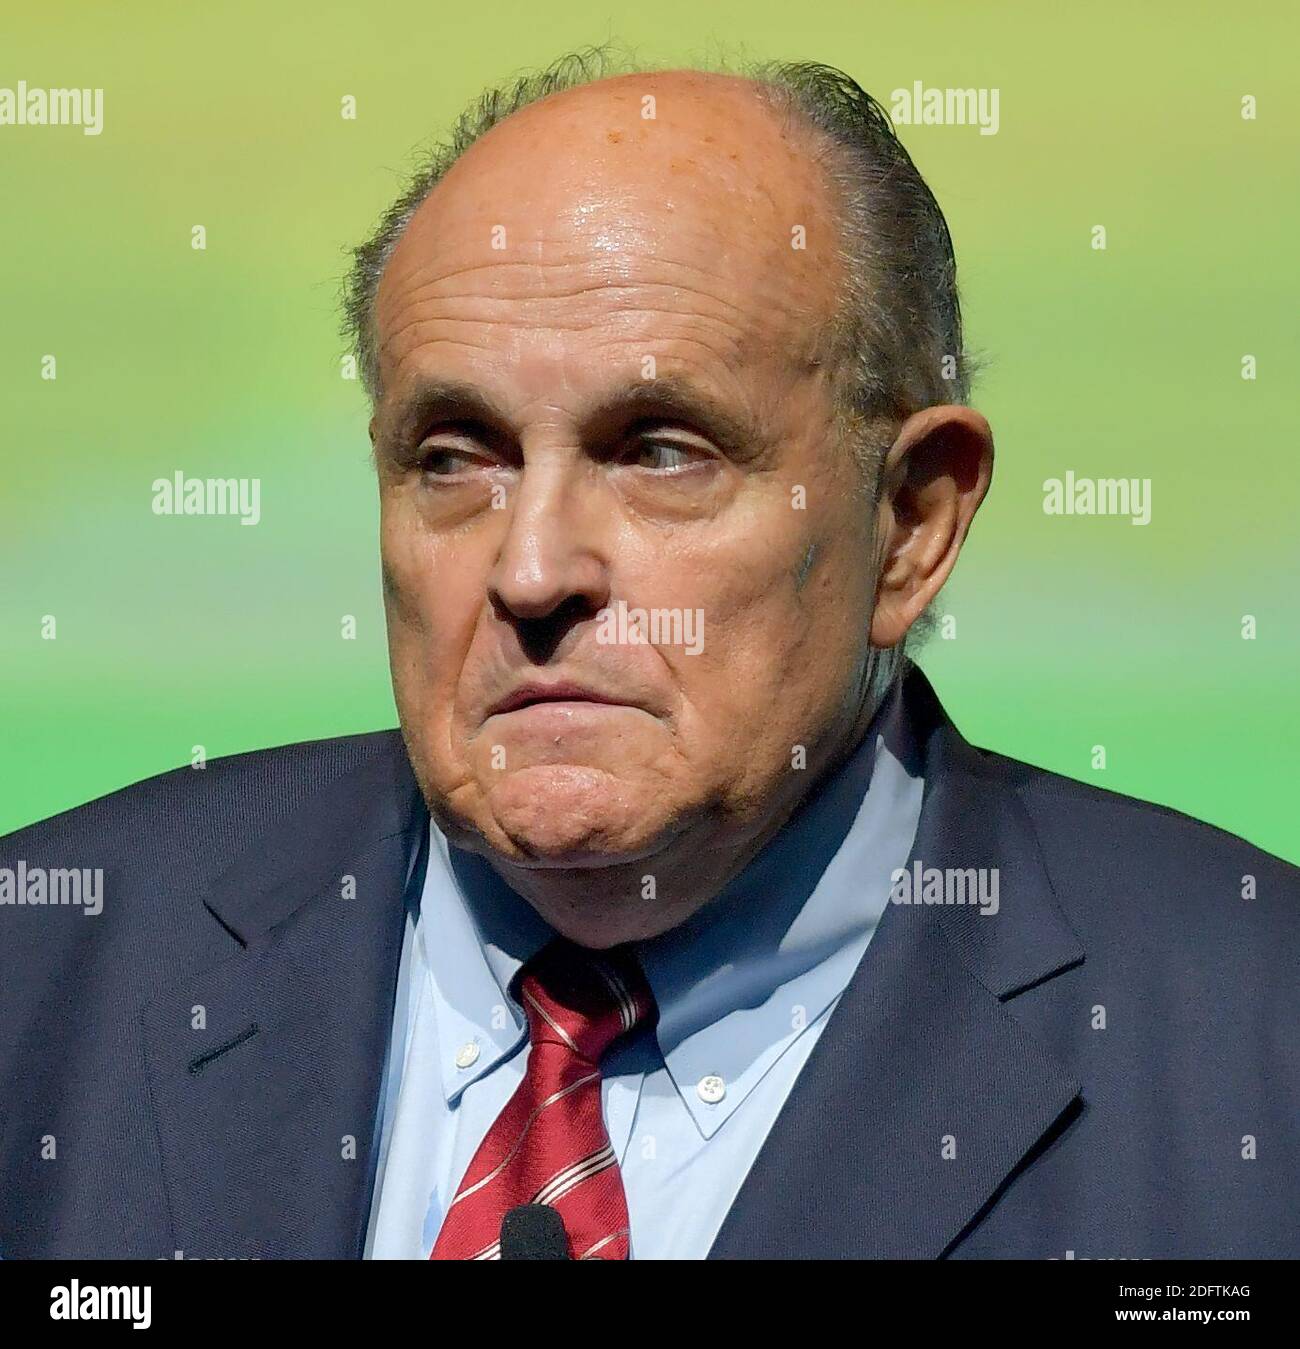 West Palm Beach, FL, USA. 19th Dec, 2020. Wearing his New York Yankee's World Series ring, Former New York City Mayor and attorney for President Donald Trump Rudy Giuliani speaks at the 2019 Turning Point USA Student Action Summit - Day 1 at the Palm Beach County Convention Center on December 19, 2019 in West Palm Beach, Florida. People: Rudy Giuliani Credit: Hoo Me/Media Punch/Alamy Live News Stock Photo